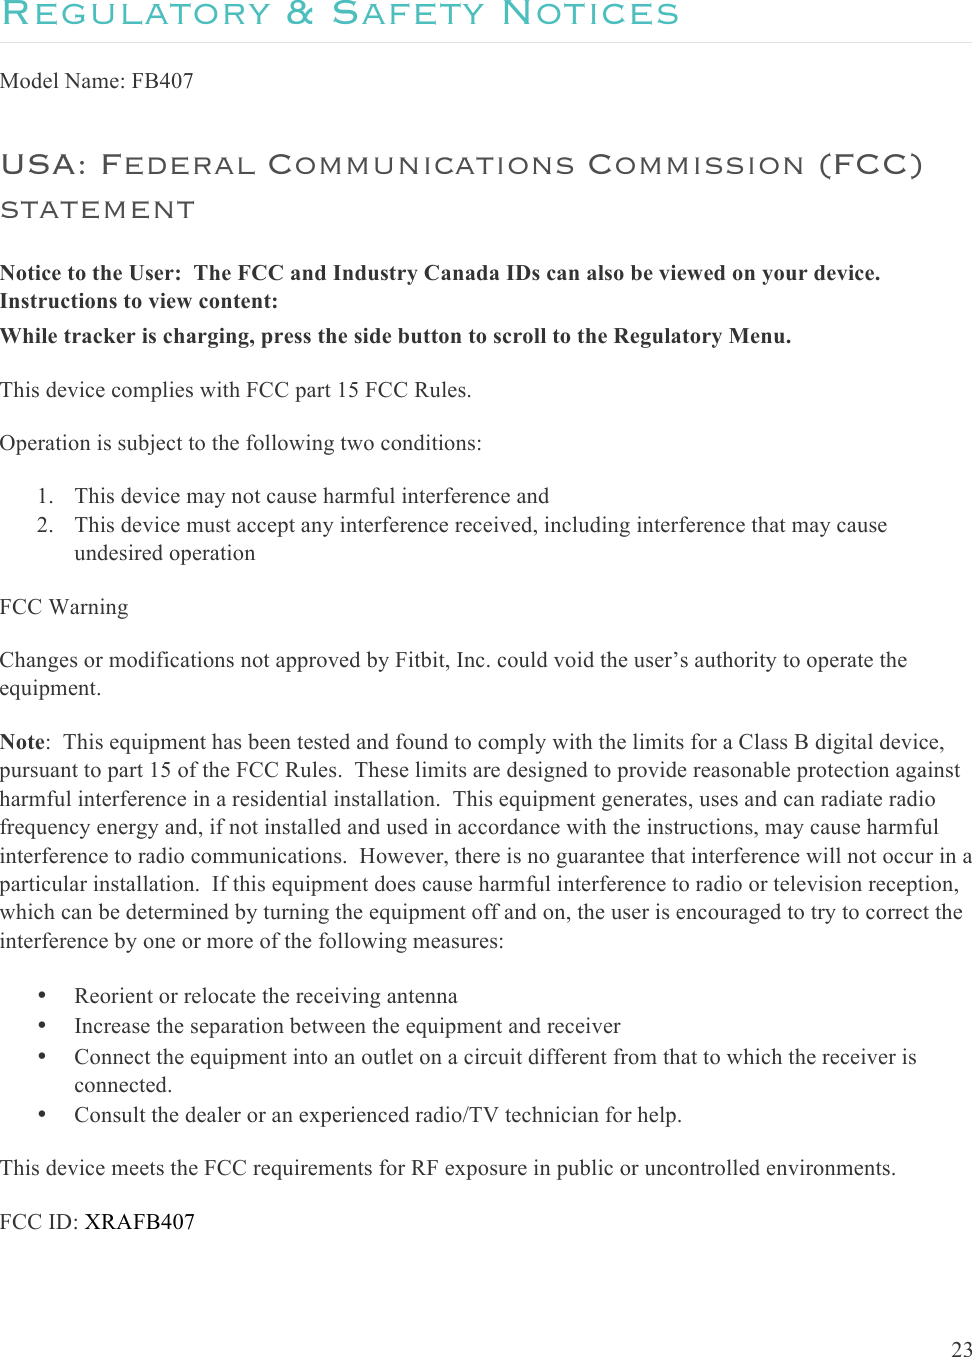  23  Regulatory &amp; Safety Notices Model Name: FB407 USA: Federal Communications Commission (FCC) statement Notice to the User:  The FCC and Industry Canada IDs can also be viewed on your device.  Instructions to view content: While tracker is charging, press the side button to scroll to the Regulatory Menu. This device complies with FCC part 15 FCC Rules. Operation is subject to the following two conditions: 1. This device may not cause harmful interference and 2. This device must accept any interference received, including interference that may cause undesired operation FCC Warning Changes or modifications not approved by Fitbit, Inc. could void the user’s authority to operate the equipment. Note:  This equipment has been tested and found to comply with the limits for a Class B digital device, pursuant to part 15 of the FCC Rules.  These limits are designed to provide reasonable protection against harmful interference in a residential installation.  This equipment generates, uses and can radiate radio frequency energy and, if not installed and used in accordance with the instructions, may cause harmful interference to radio communications.  However, there is no guarantee that interference will not occur in a particular installation.  If this equipment does cause harmful interference to radio or television reception, which can be determined by turning the equipment off and on, the user is encouraged to try to correct the interference by one or more of the following measures: • Reorient or relocate the receiving antenna • Increase the separation between the equipment and receiver • Connect the equipment into an outlet on a circuit different from that to which the receiver is connected. • Consult the dealer or an experienced radio/TV technician for help. This device meets the FCC requirements for RF exposure in public or uncontrolled environments. FCC ID: XRAFB407 